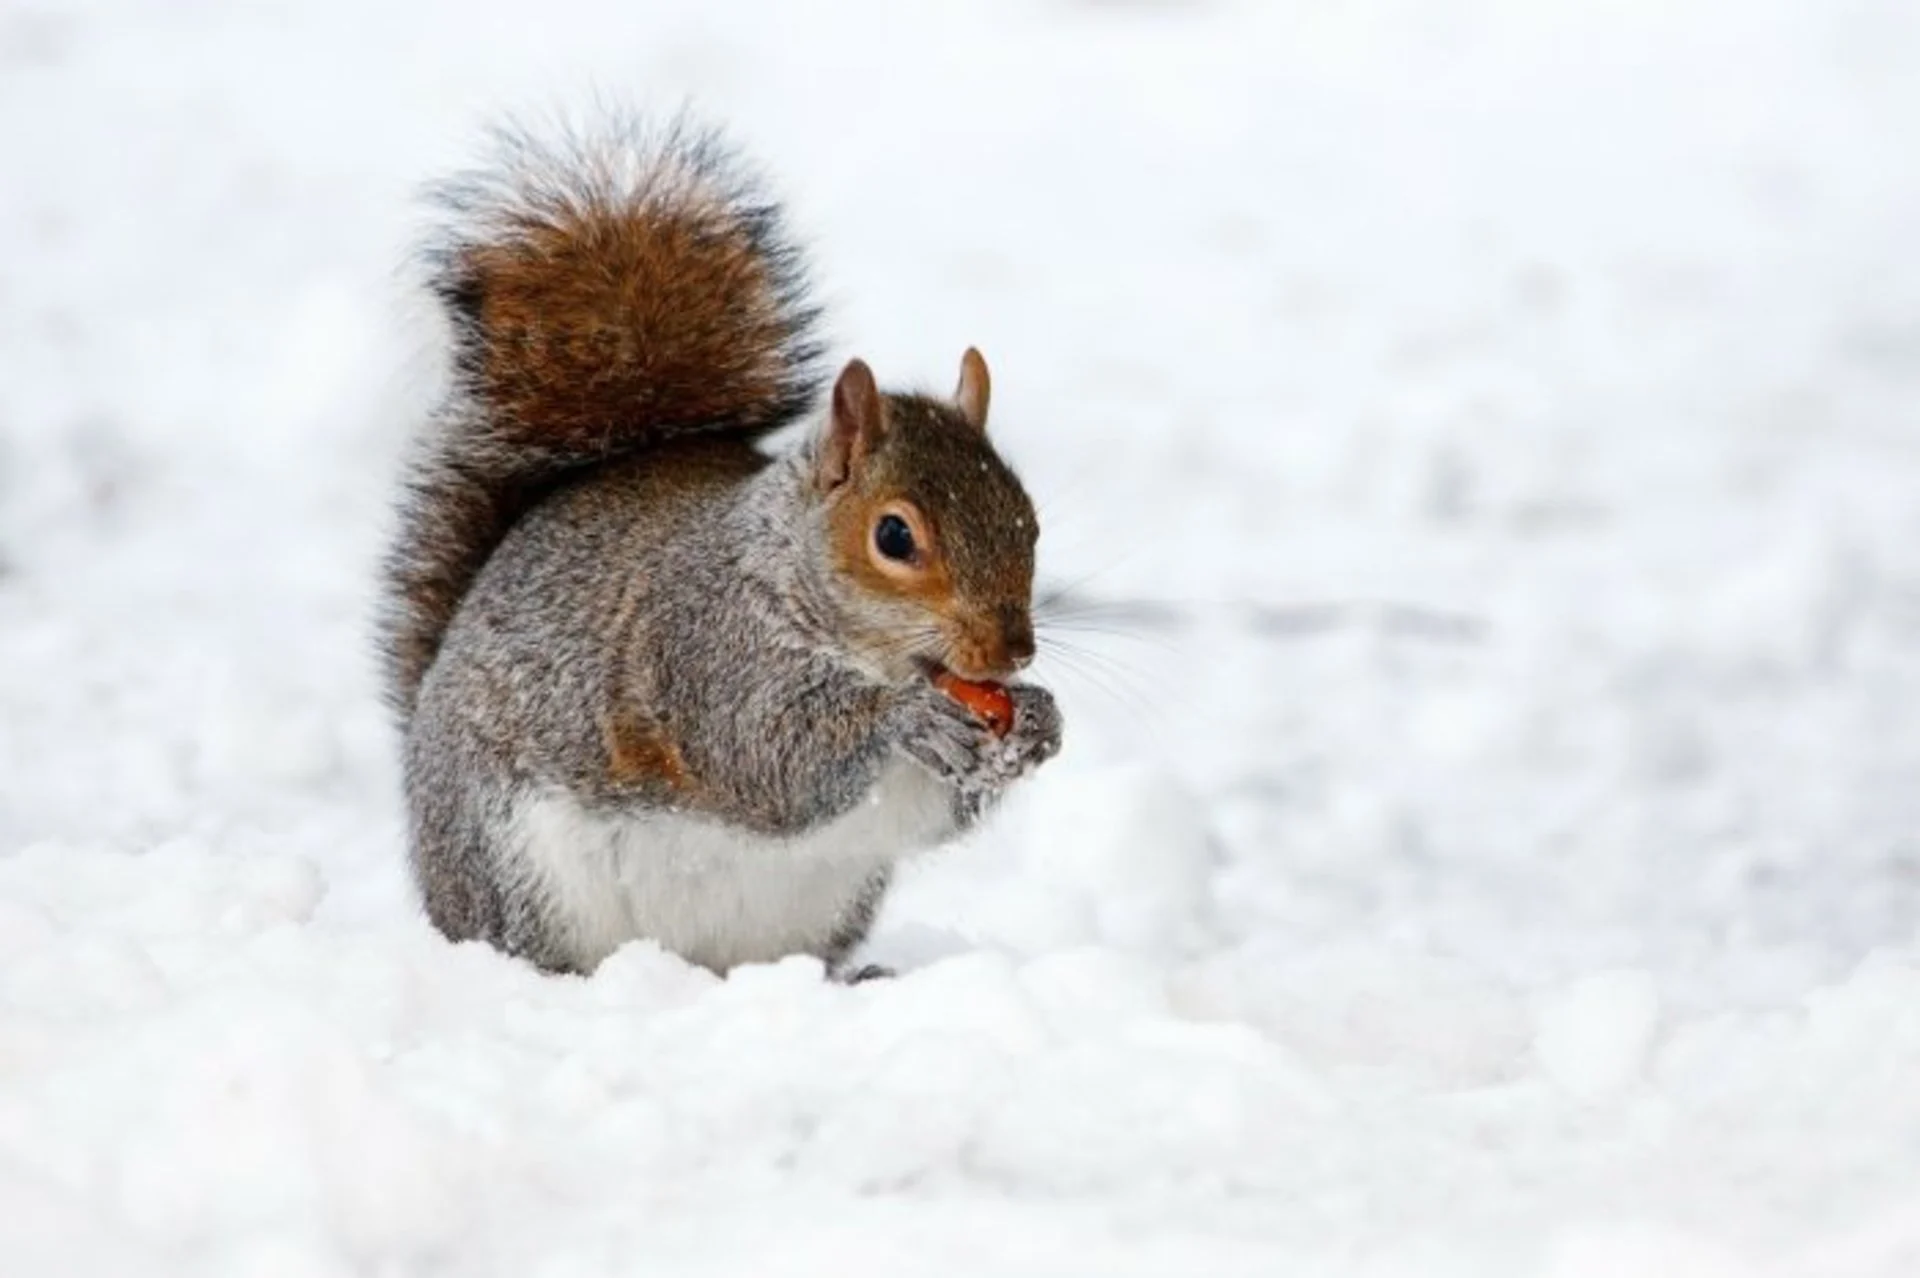 Can squirrels actually predict the type of winter to come?